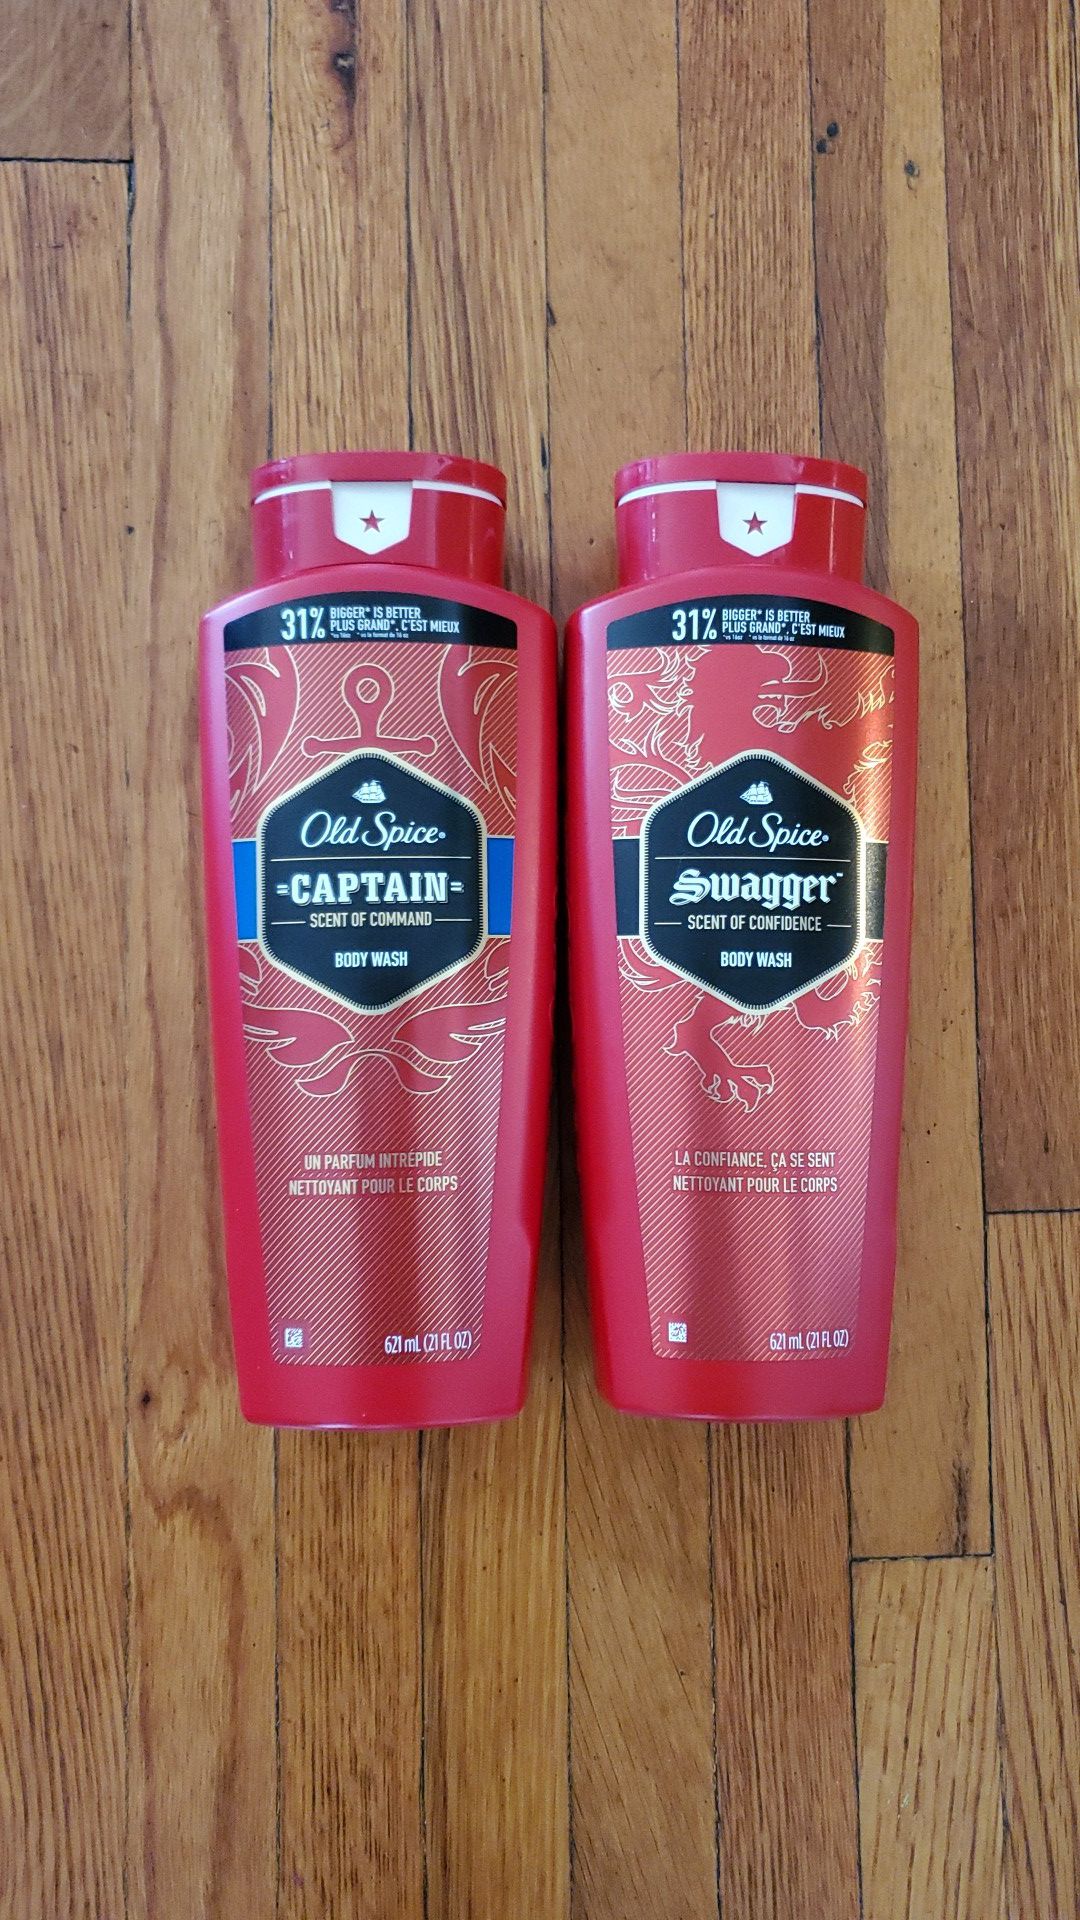 Old Spice bodywash 21 fl oz $4 each 6 left ONLY ACCEPTING VENMO AND ZELLE AS PAYMENT